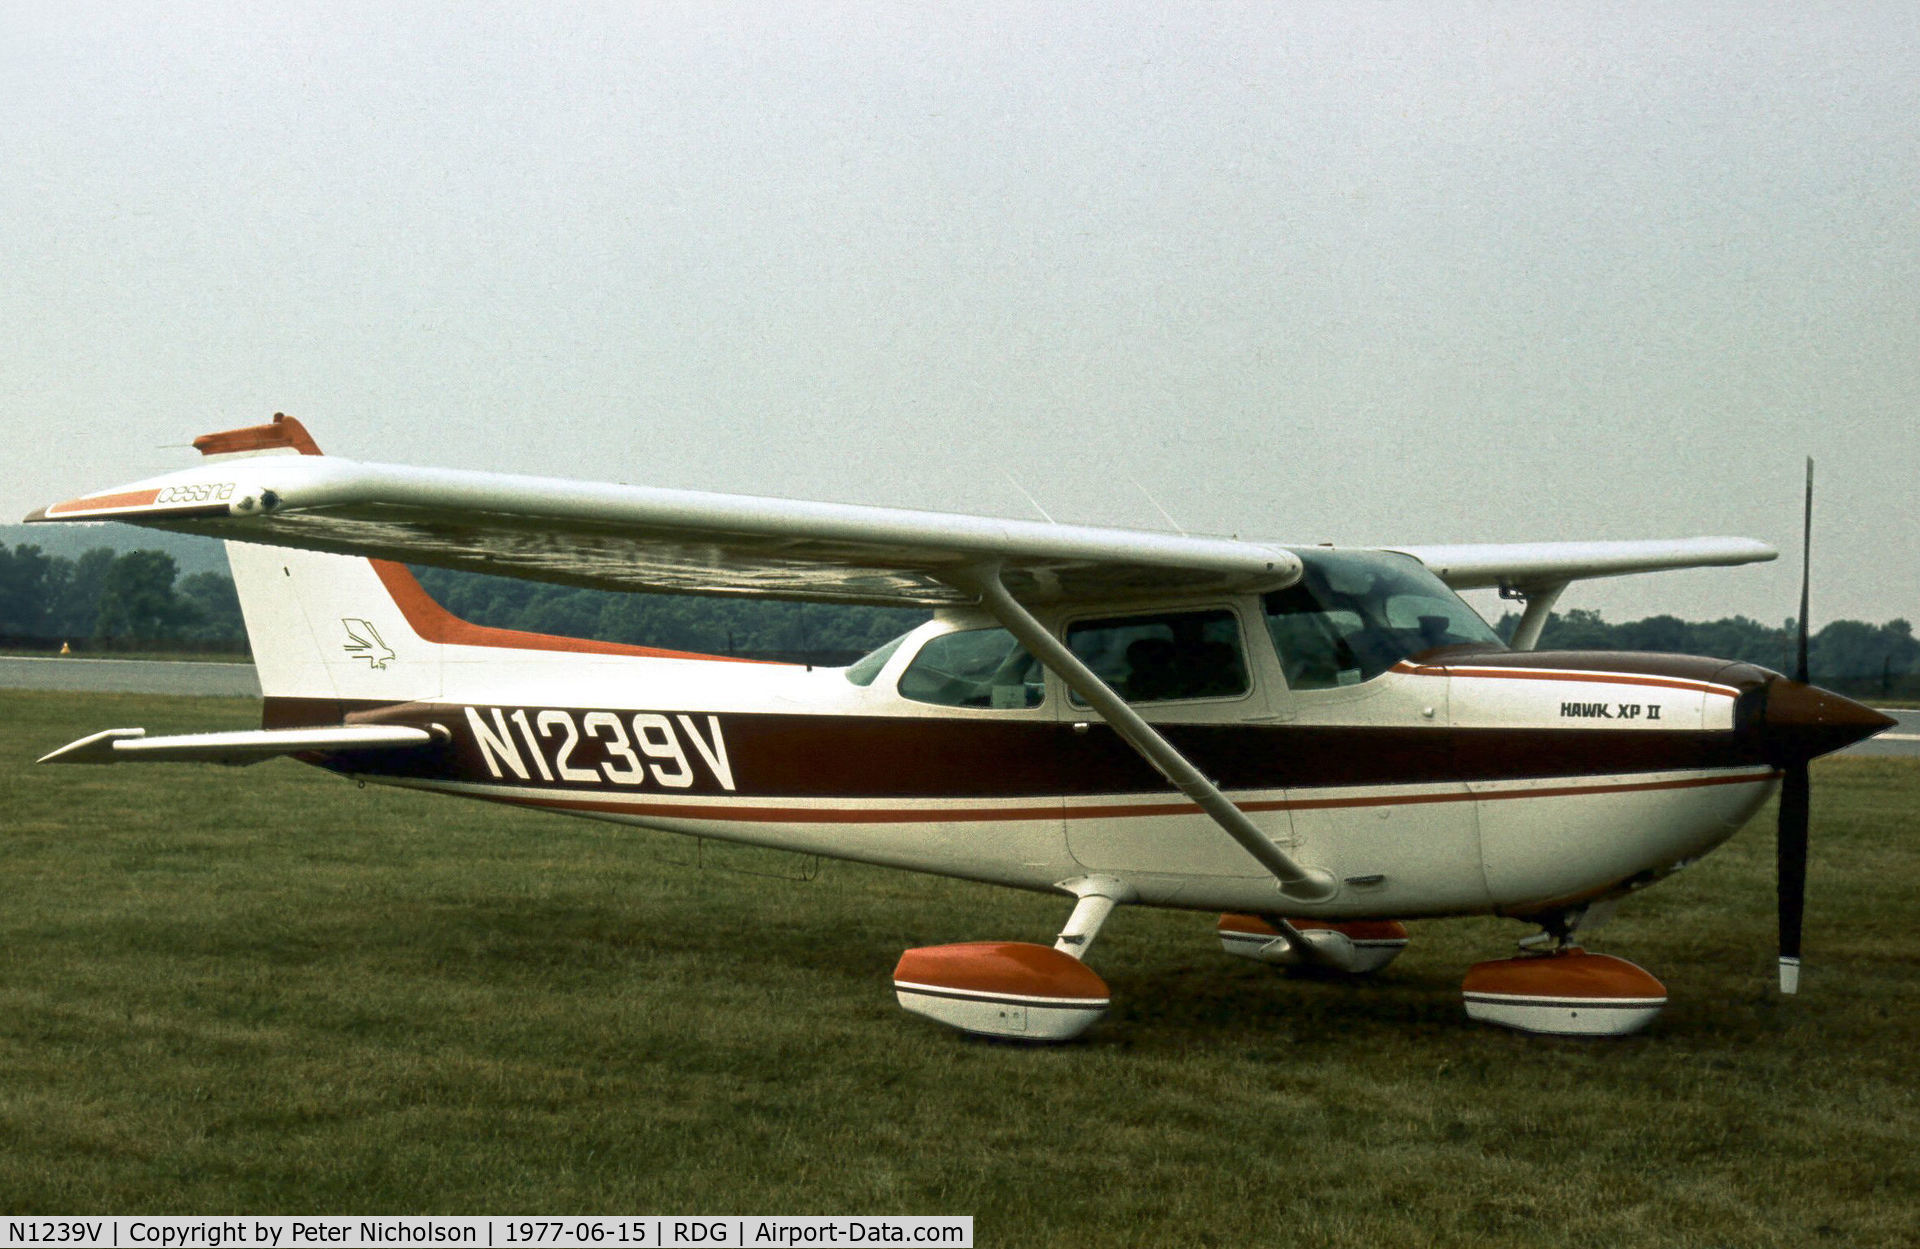 N1239V, Cessna R172K Hawk XP C/N R1722149, Cessna Hawk XP II seen at the 1977 Reading Airshow.